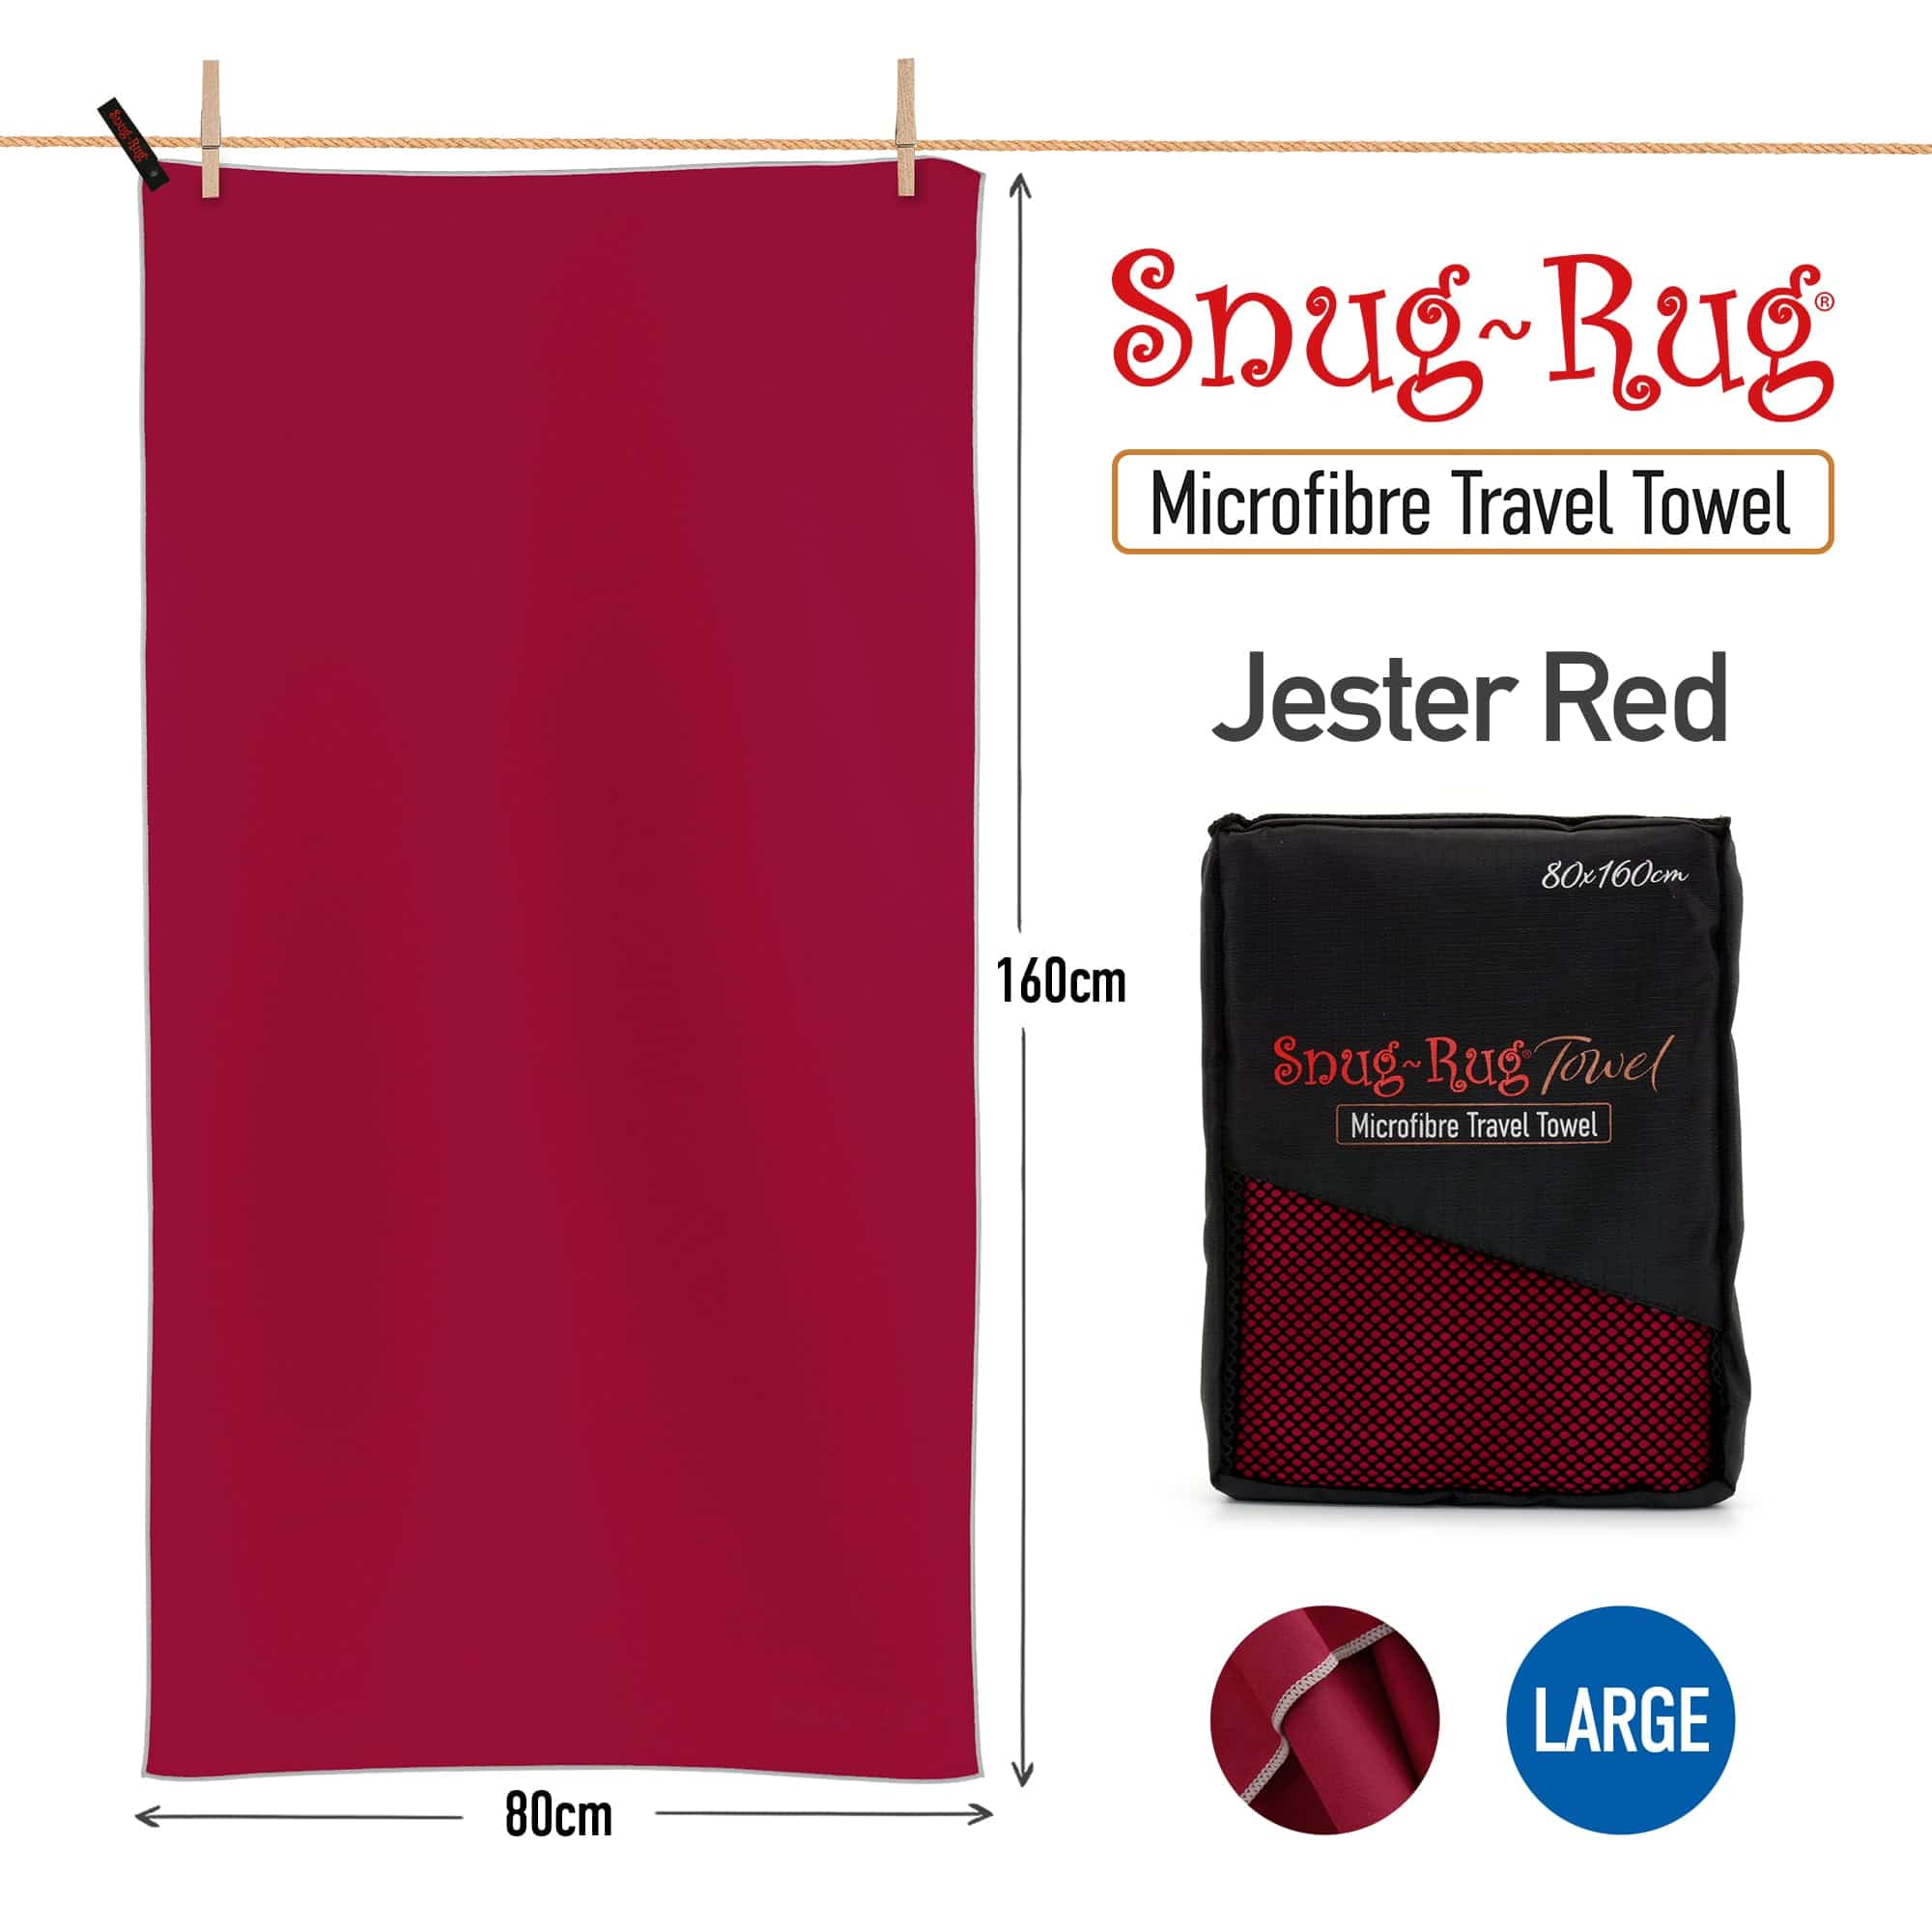 Jester Red